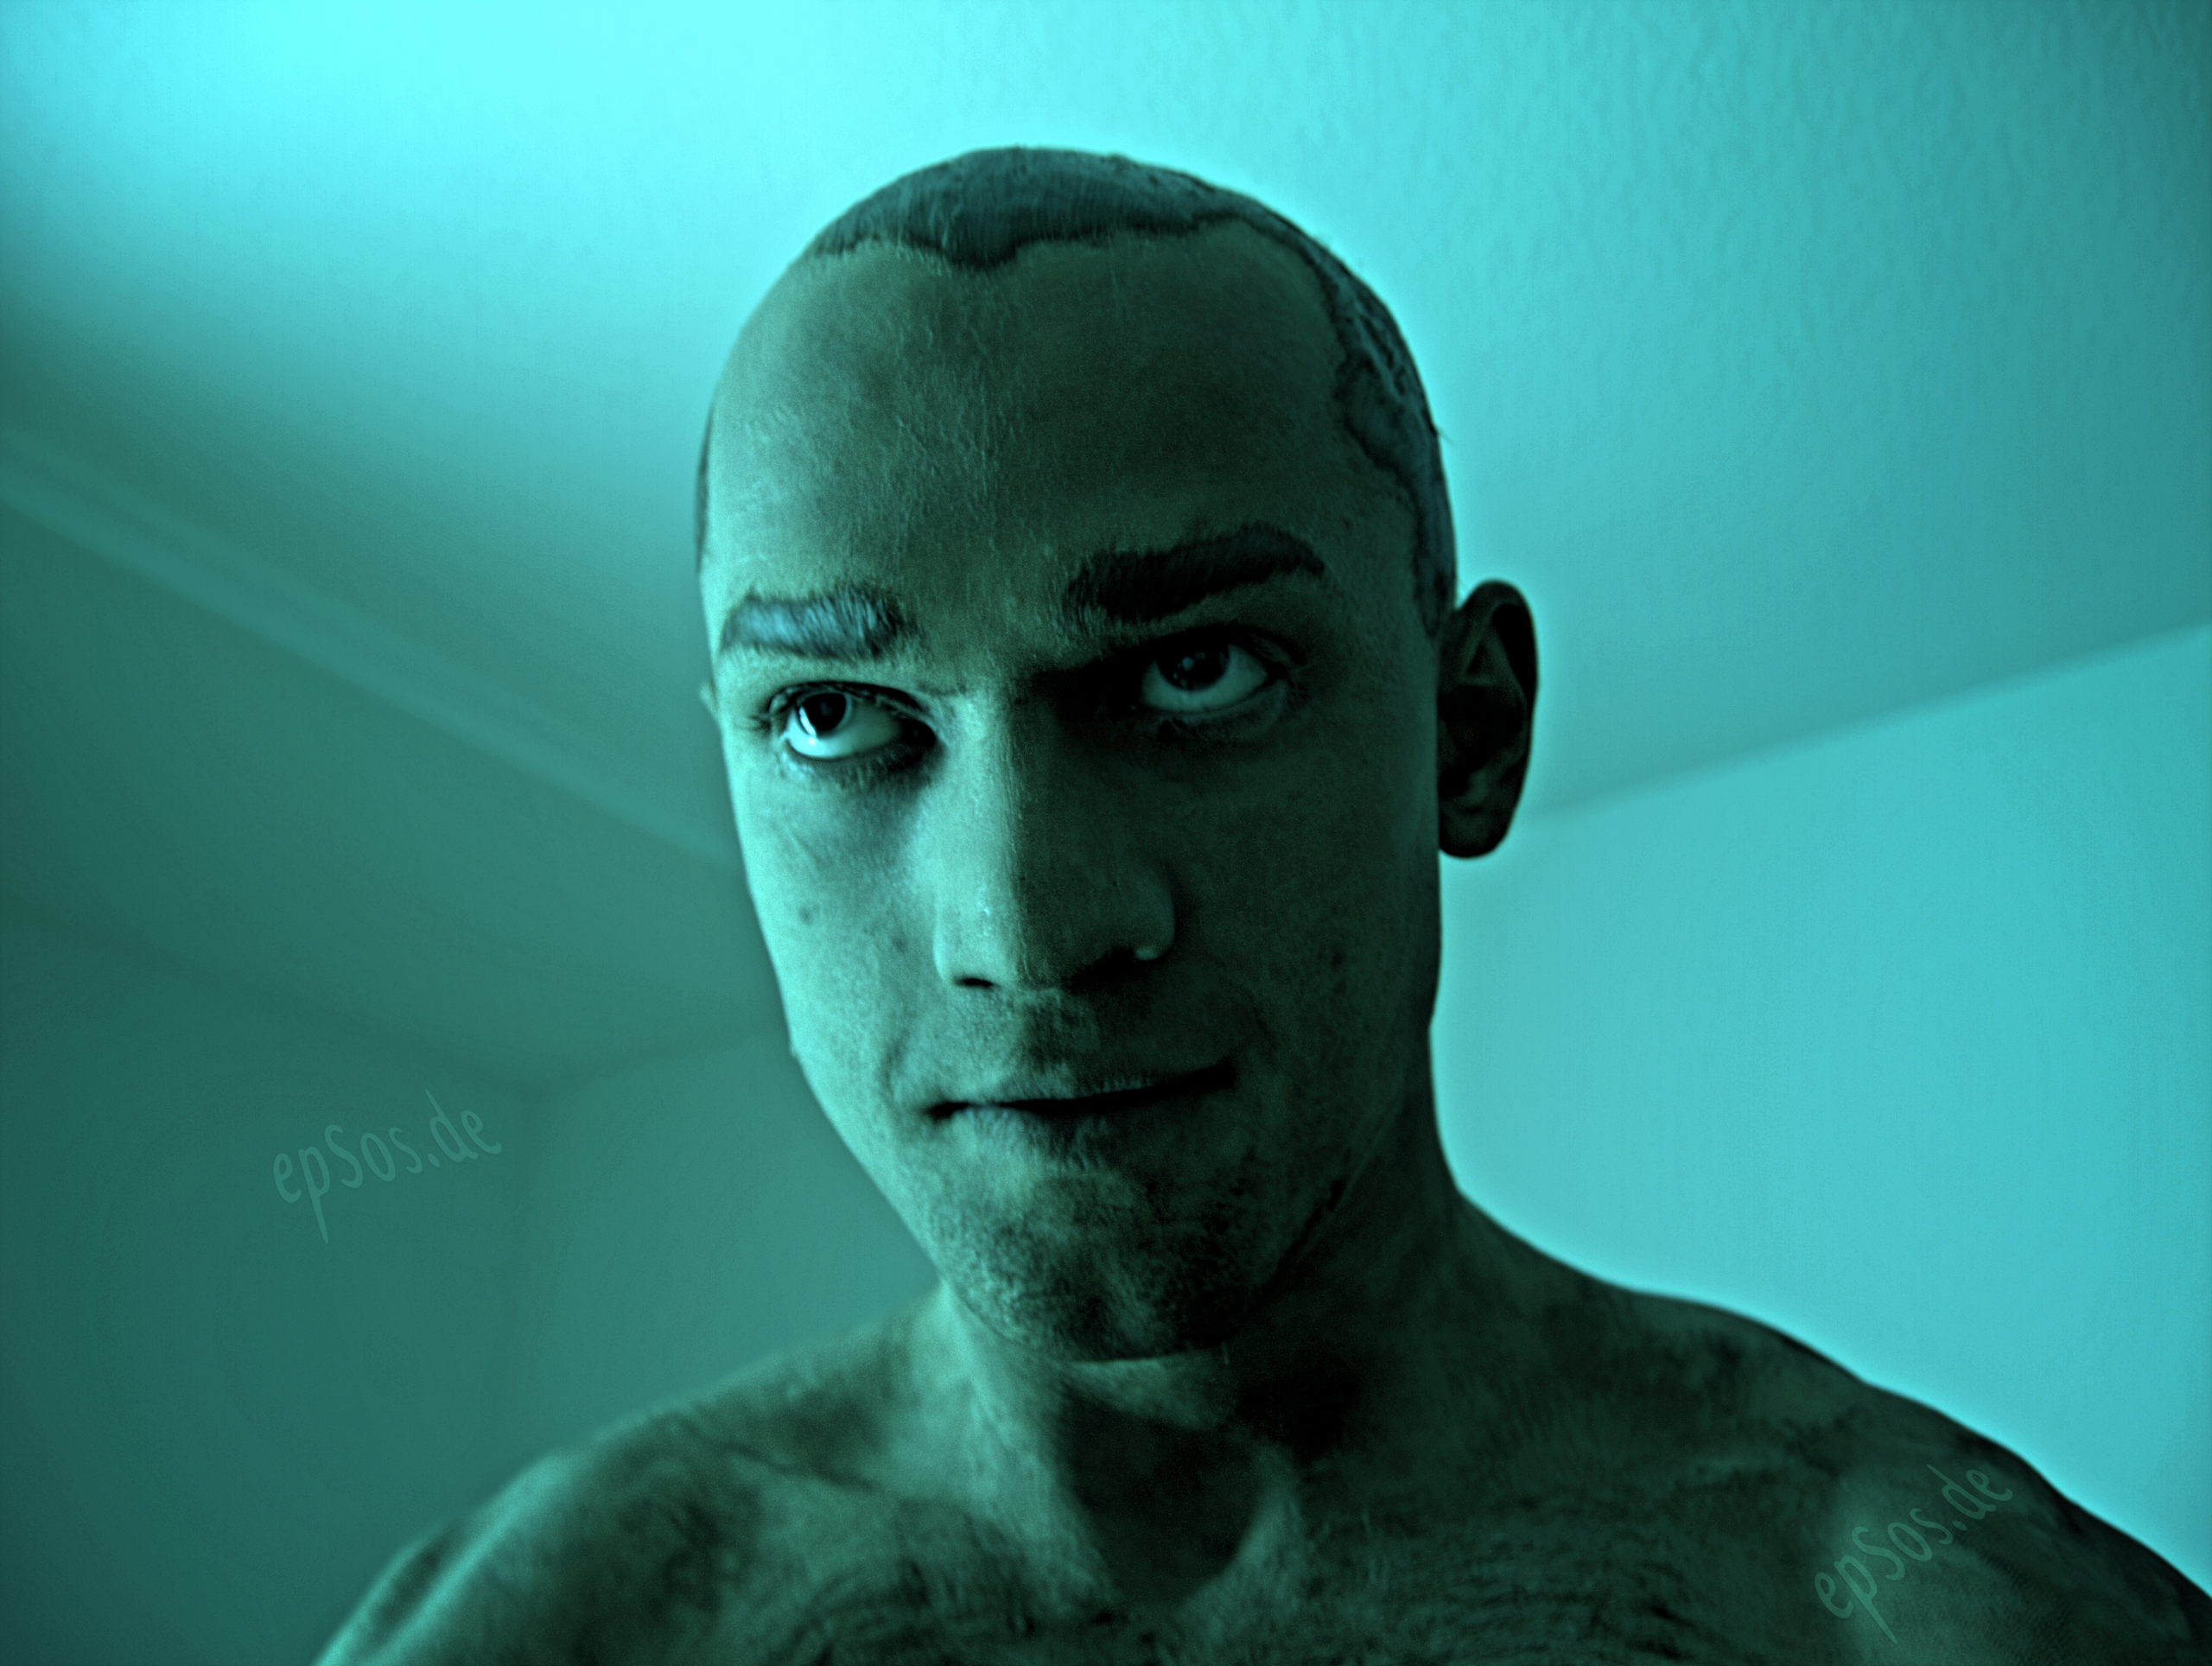 File:Crazy Blue Man in Makeup.png - Wikimedia Commons